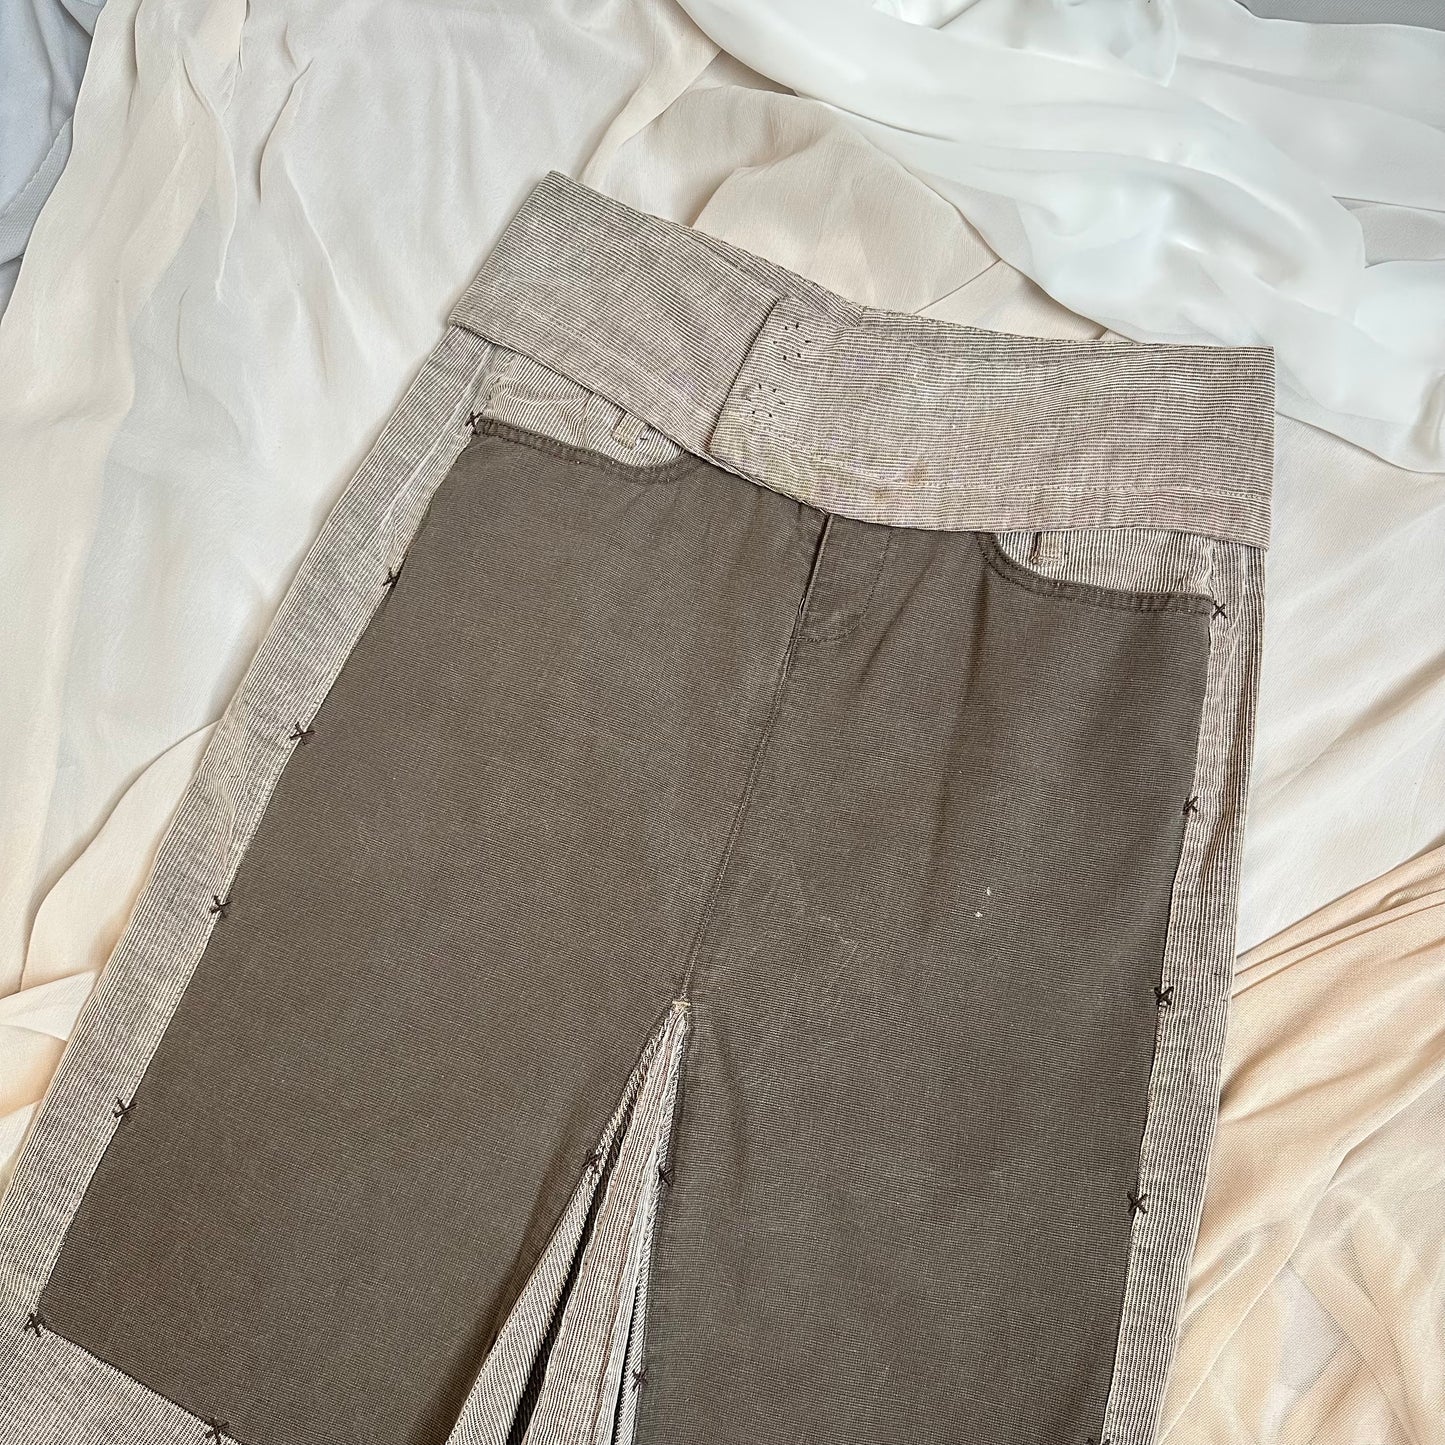 TWO TONE GREY CORD MAXI SKIRT by marithé et françois girbaud